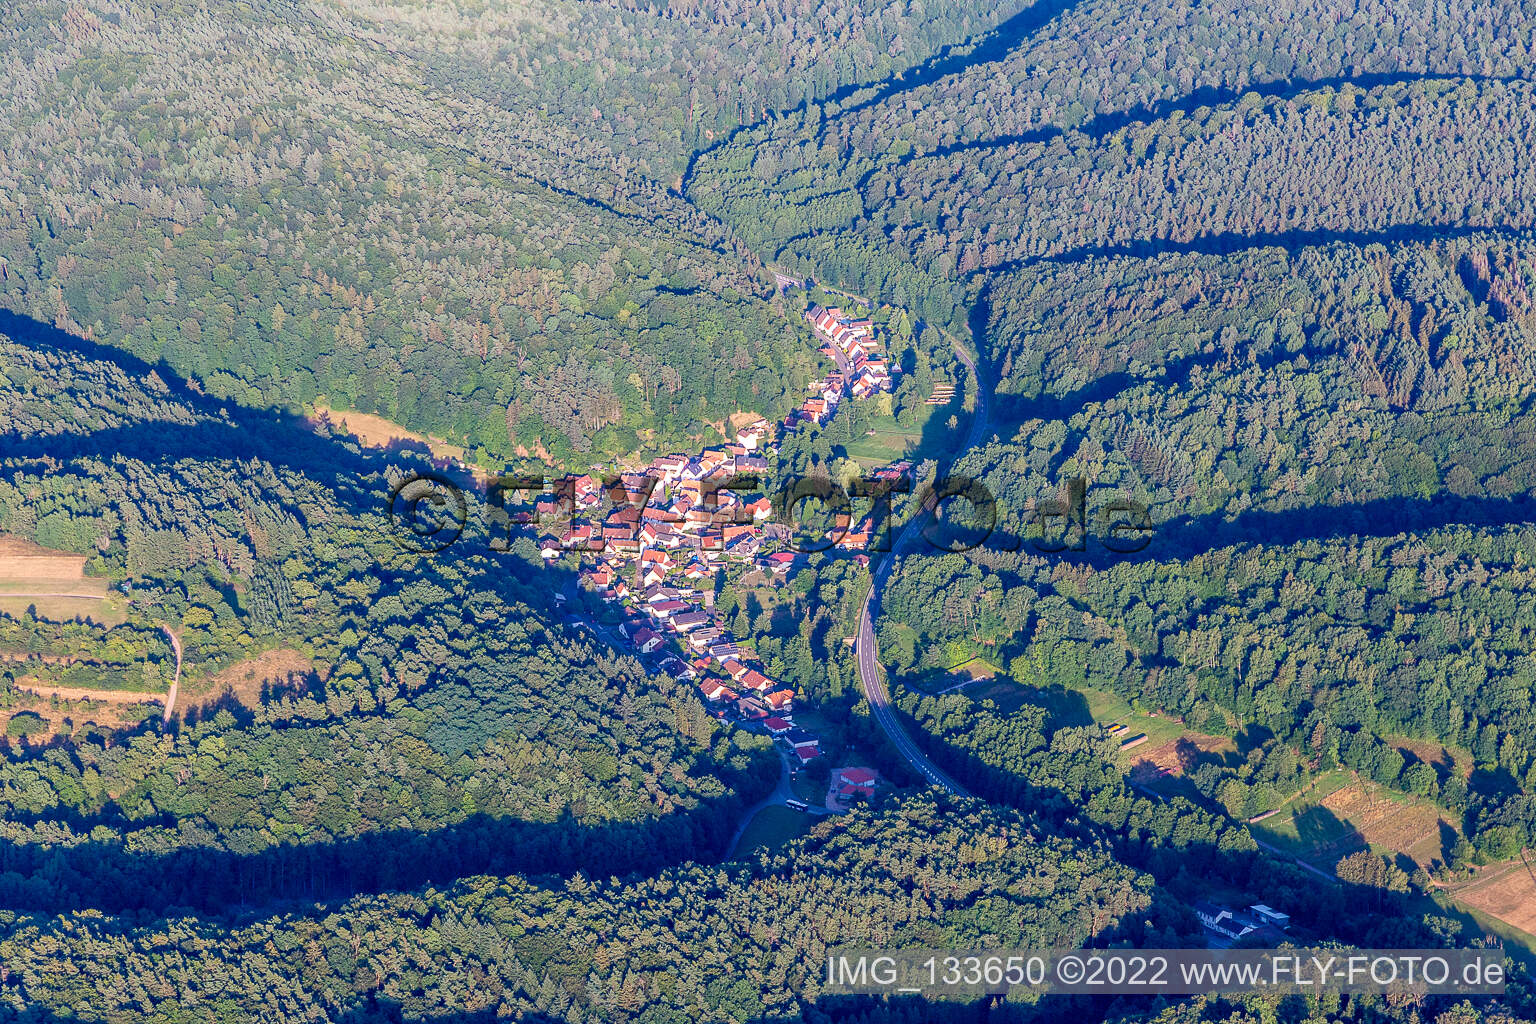 Münchweiler am Klingbach in the state Rhineland-Palatinate, Germany seen from above